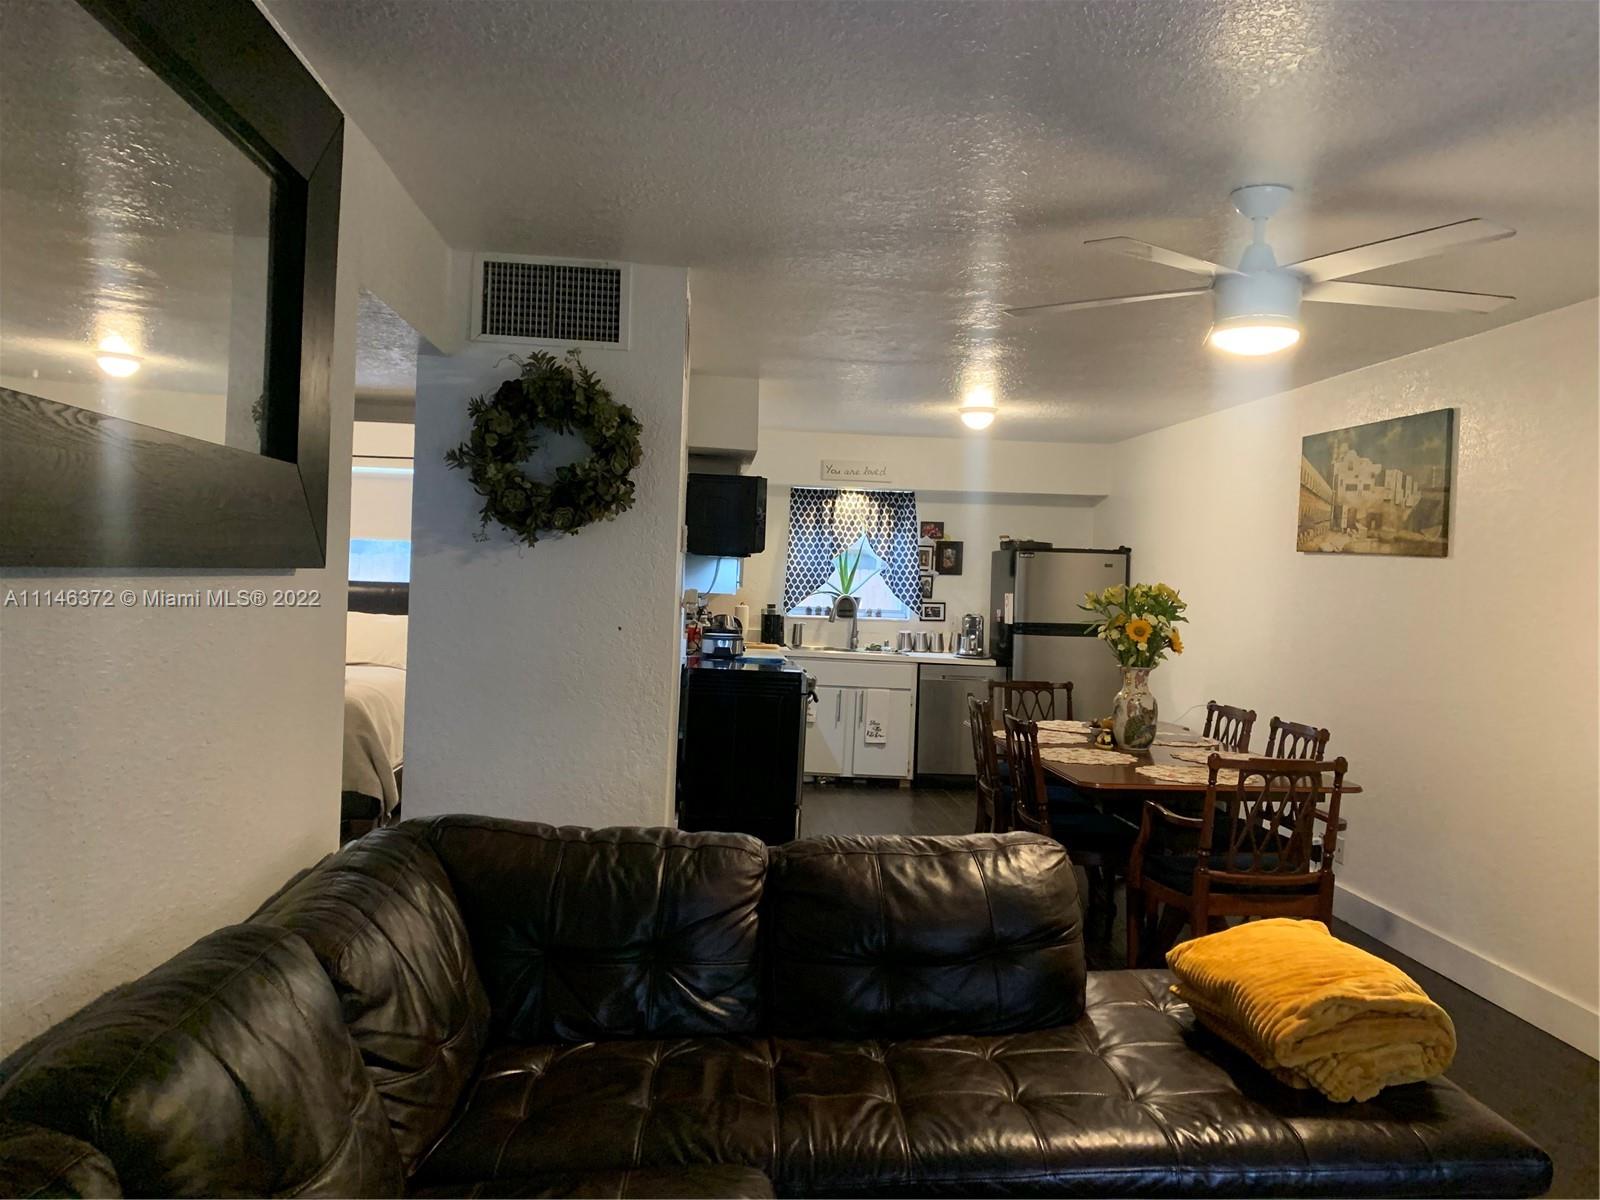 Fantastic opportunity for 2-br, 5 blocks S of Las Olas and its restaurants, stores, galleries, art museum, BCCH. HOA is $320/mo. Perfect 2nd home or primary for someone who works downtown or at courthouse (10min walk). Easy access, ground-floor unit with many updates (removal of popcorn ceiling, wood-look-porcelain floor throughout, SS appliances, updated closet...). Please review the pictures to fully appreciate. Water taxi stop to hail it to cross to Las Olas or beyond 100 yards north or you can walk/bike along the south shore river and cross over the river to Las Olas on the 3rd Ave bridge. This is a great location convenient and 11 minutes to FLL airport, Publix, WholeFoods, the multiple marinas in the area, Port Everglades... Contact listing agent for flexible showings or questions.